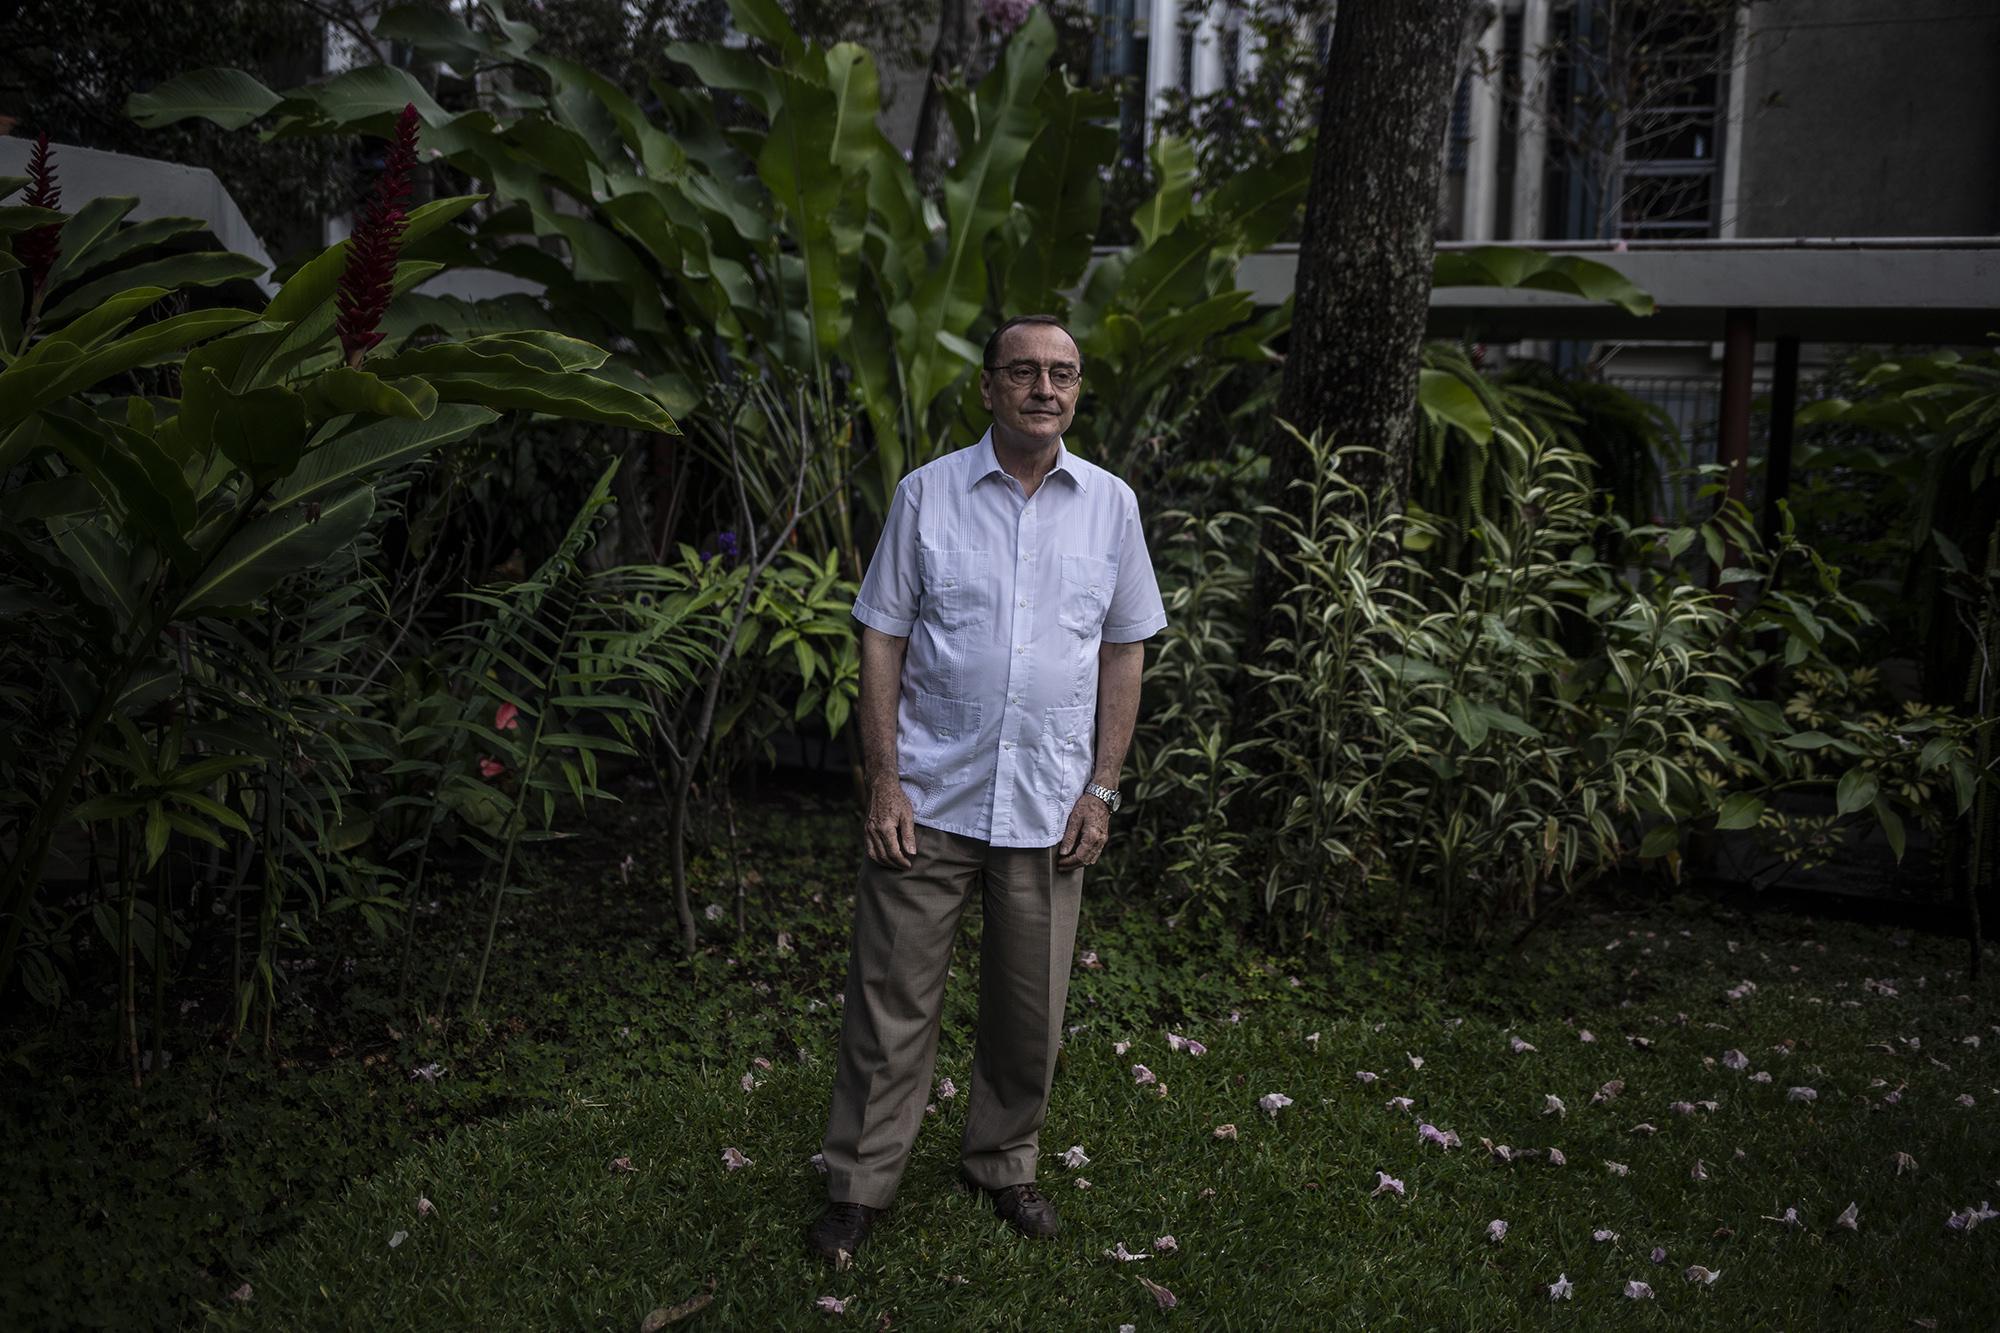 Oliva, who is originally from Catalonia, will turn 65 in October. In 2008, after years living in Nicaragua and Honduras, he came to the UCA in El Salvador to serve as vice-rector of public outreach. Photo for El Faro: Carlos Barrera